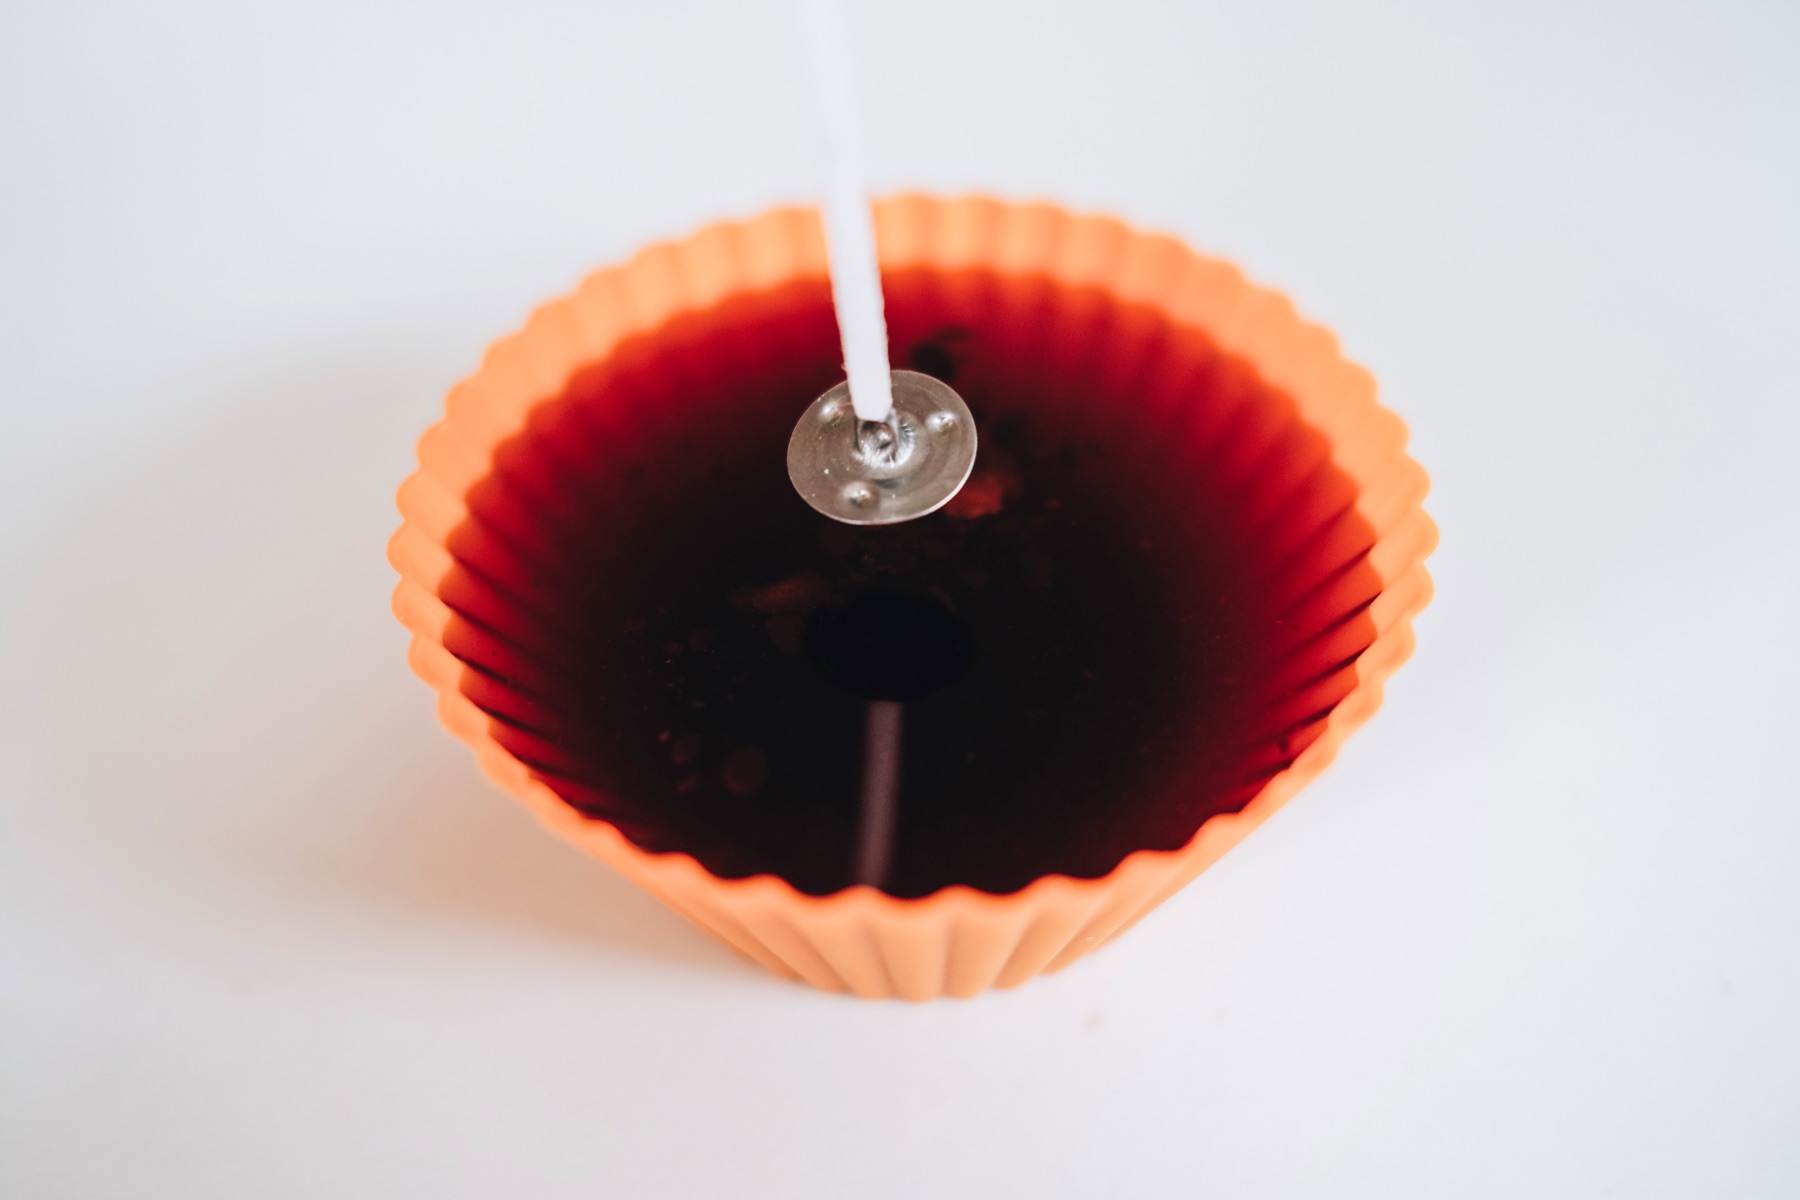 pour the wax in the cupcake mold and add the wick